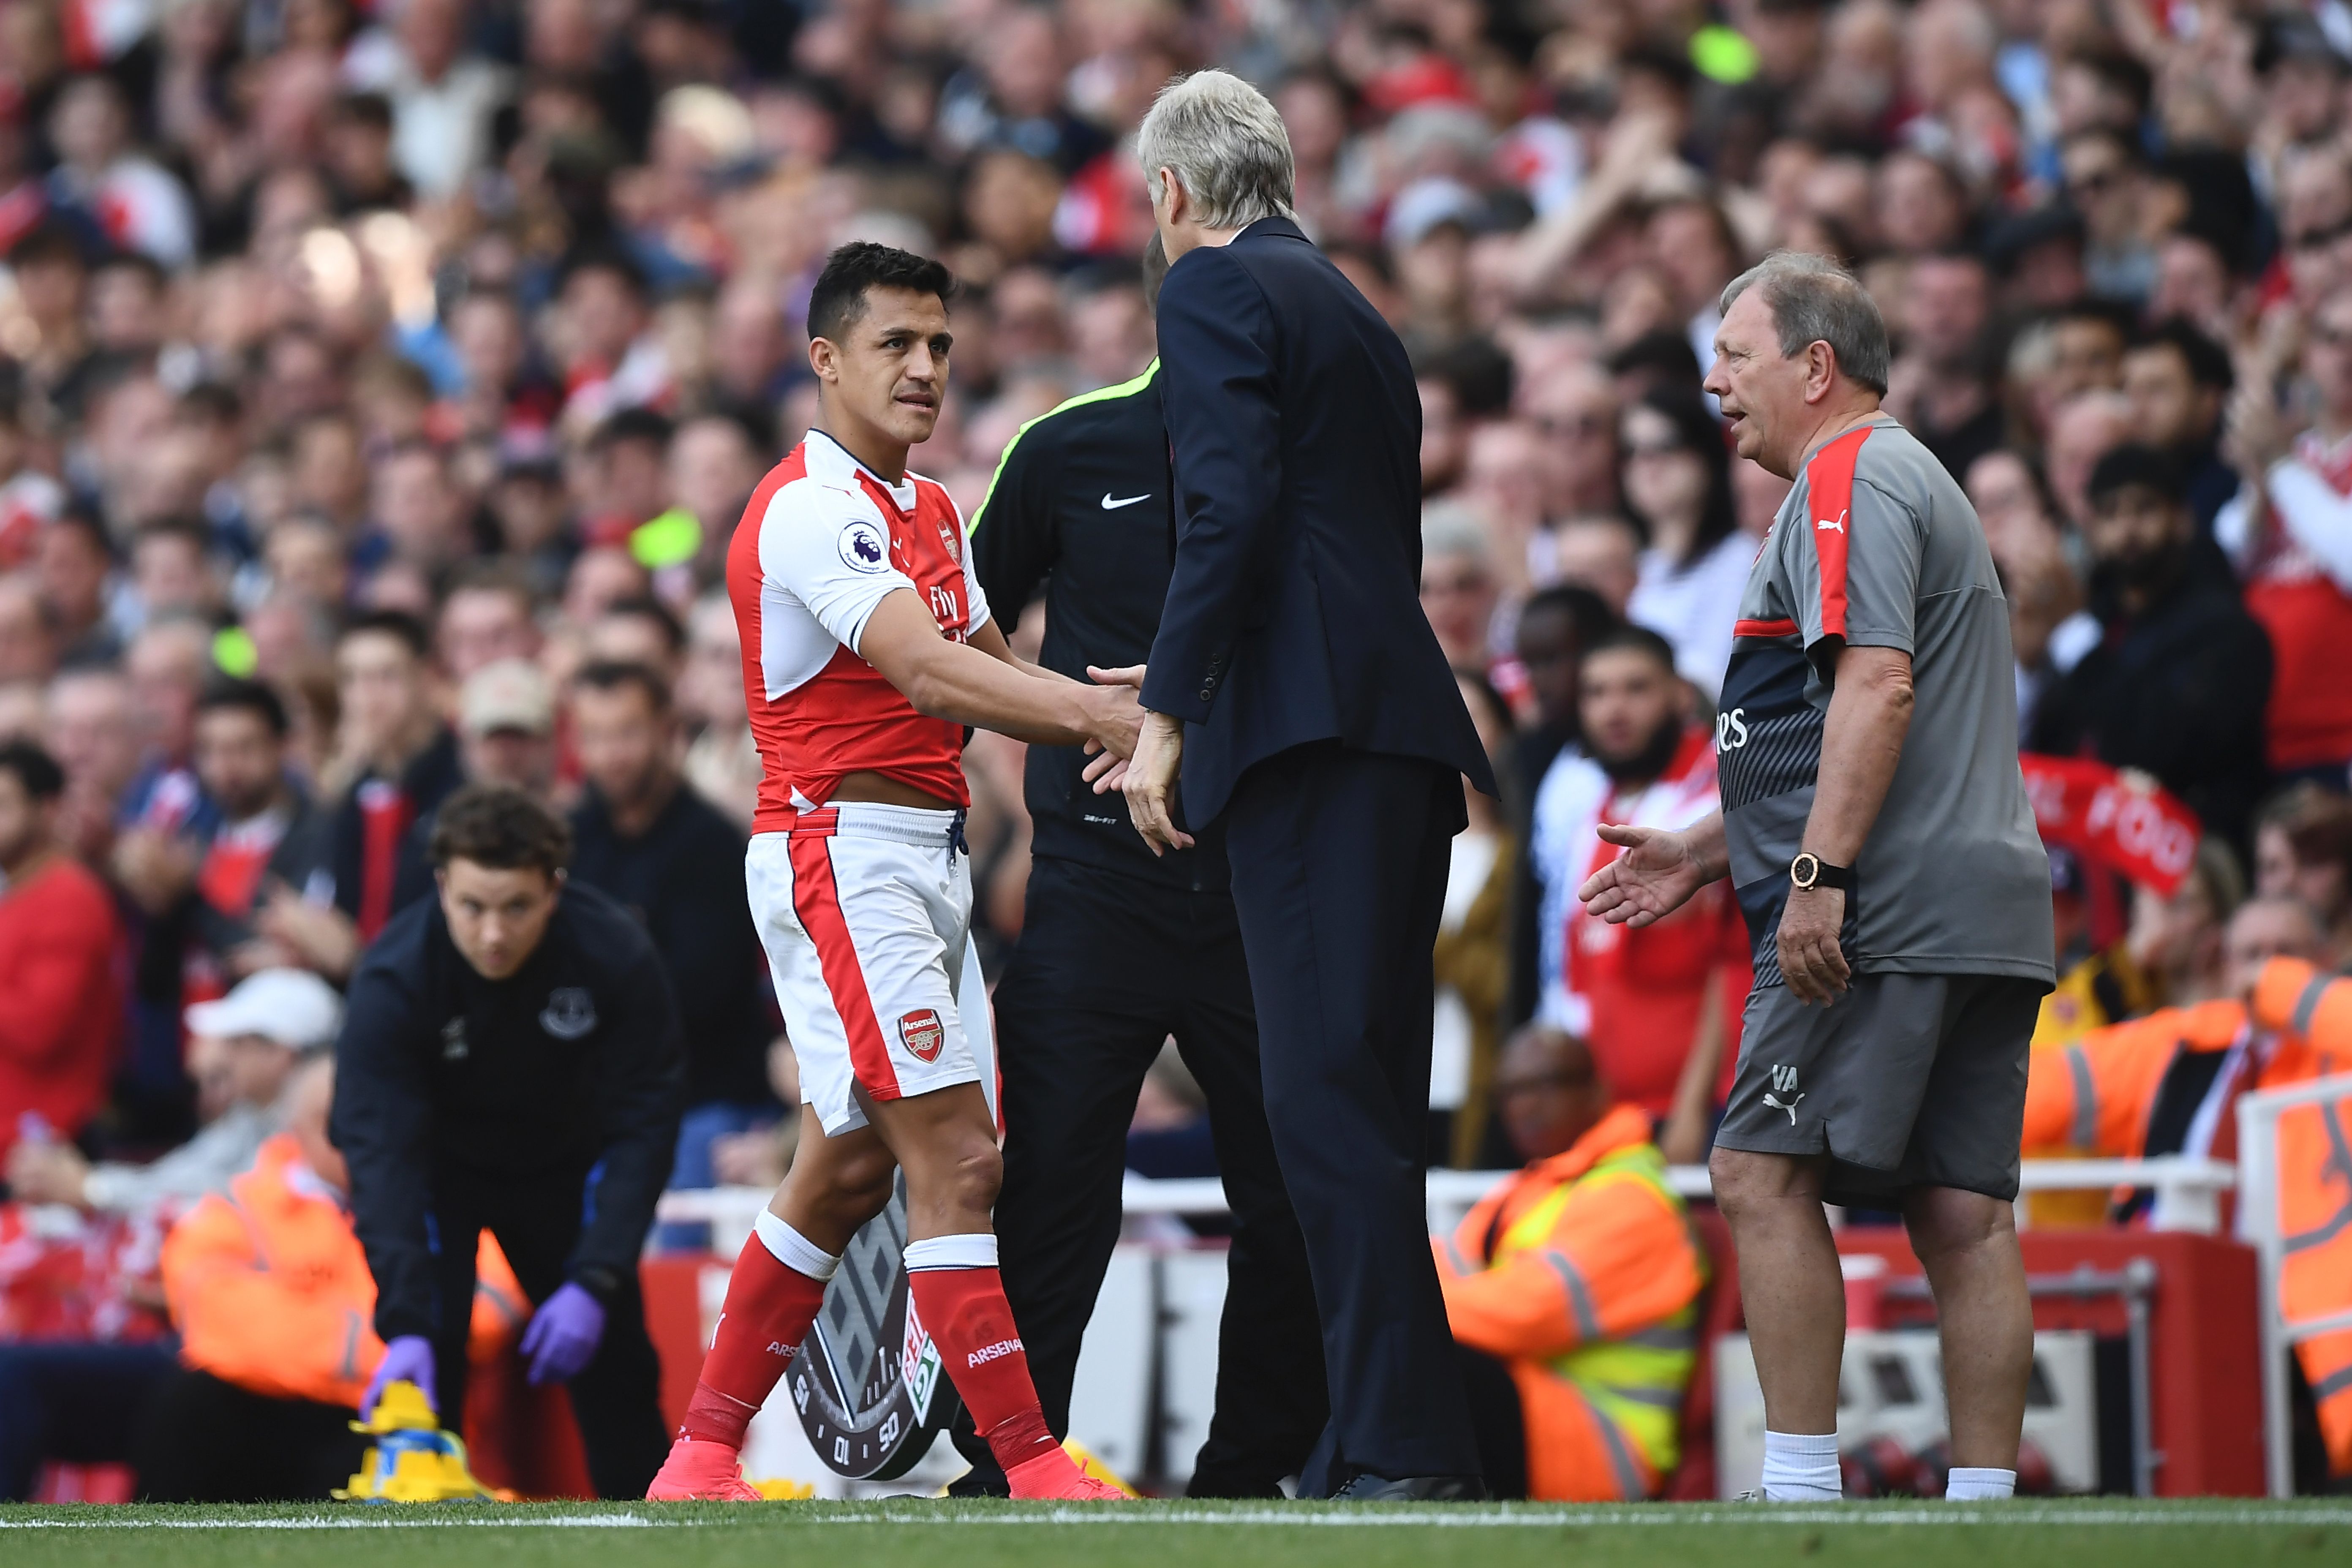 Arsenal's Chilean striker Alexis Sanchez (L) shakes hands with Arsenal's French manager Arsene Wenger (R) as he goes off substituted during the English Premier League football match between Arsenal and Everton at the Emirates Stadium in London on May 21, 2017.  / AFP PHOTO / Justin TALLIS / RESTRICTED TO EDITORIAL USE. No use with unauthorized audio, video, data, fixture lists, club/league logos or 'live' services. Online in-match use limited to 75 images, no video emulation. No use in betting, games or single club/league/player publications.  /         (Photo credit should read JUSTIN TALLIS/AFP/Getty Images)